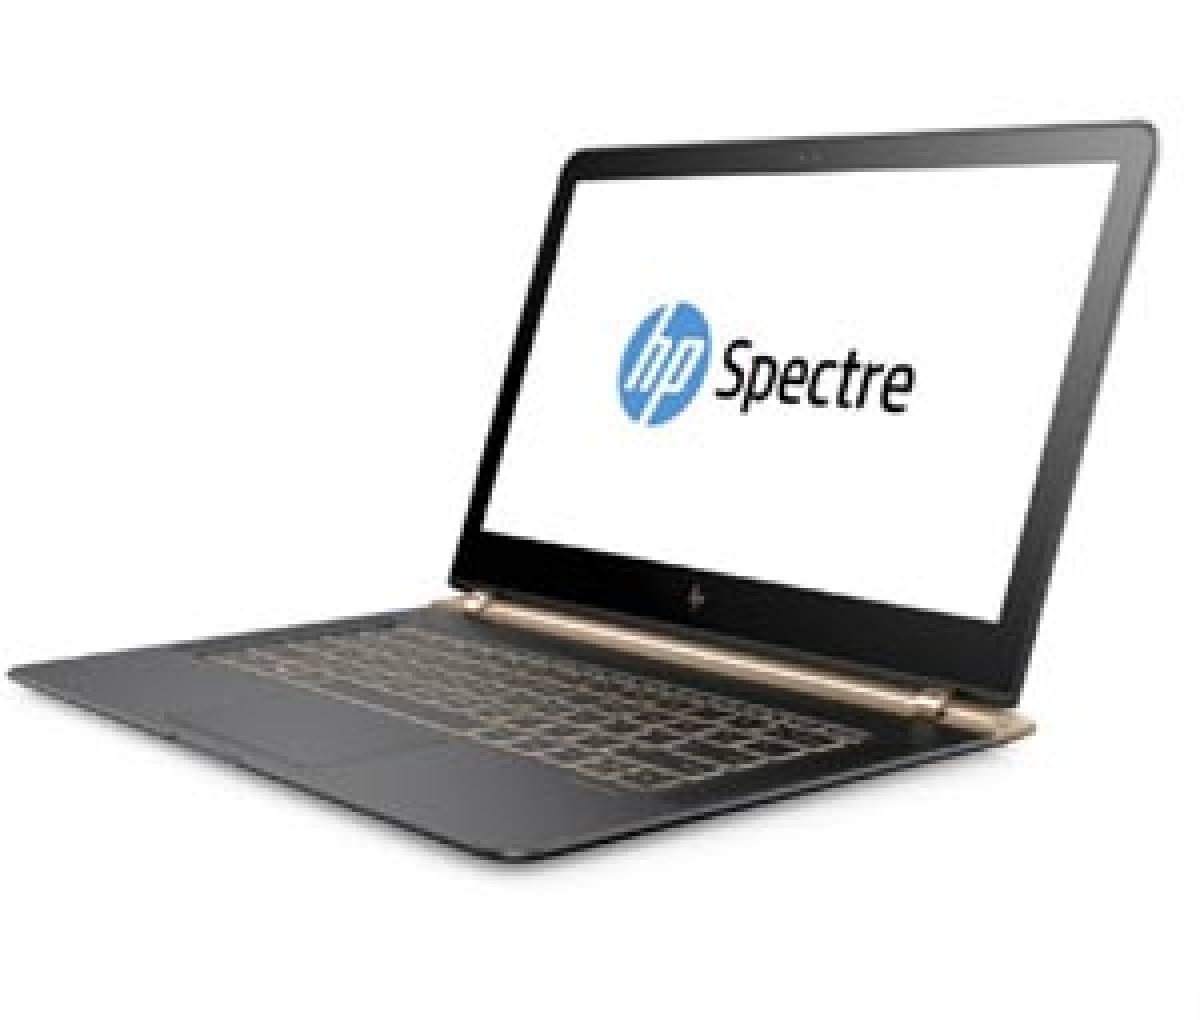 HP to launch thinnest laptop June 21